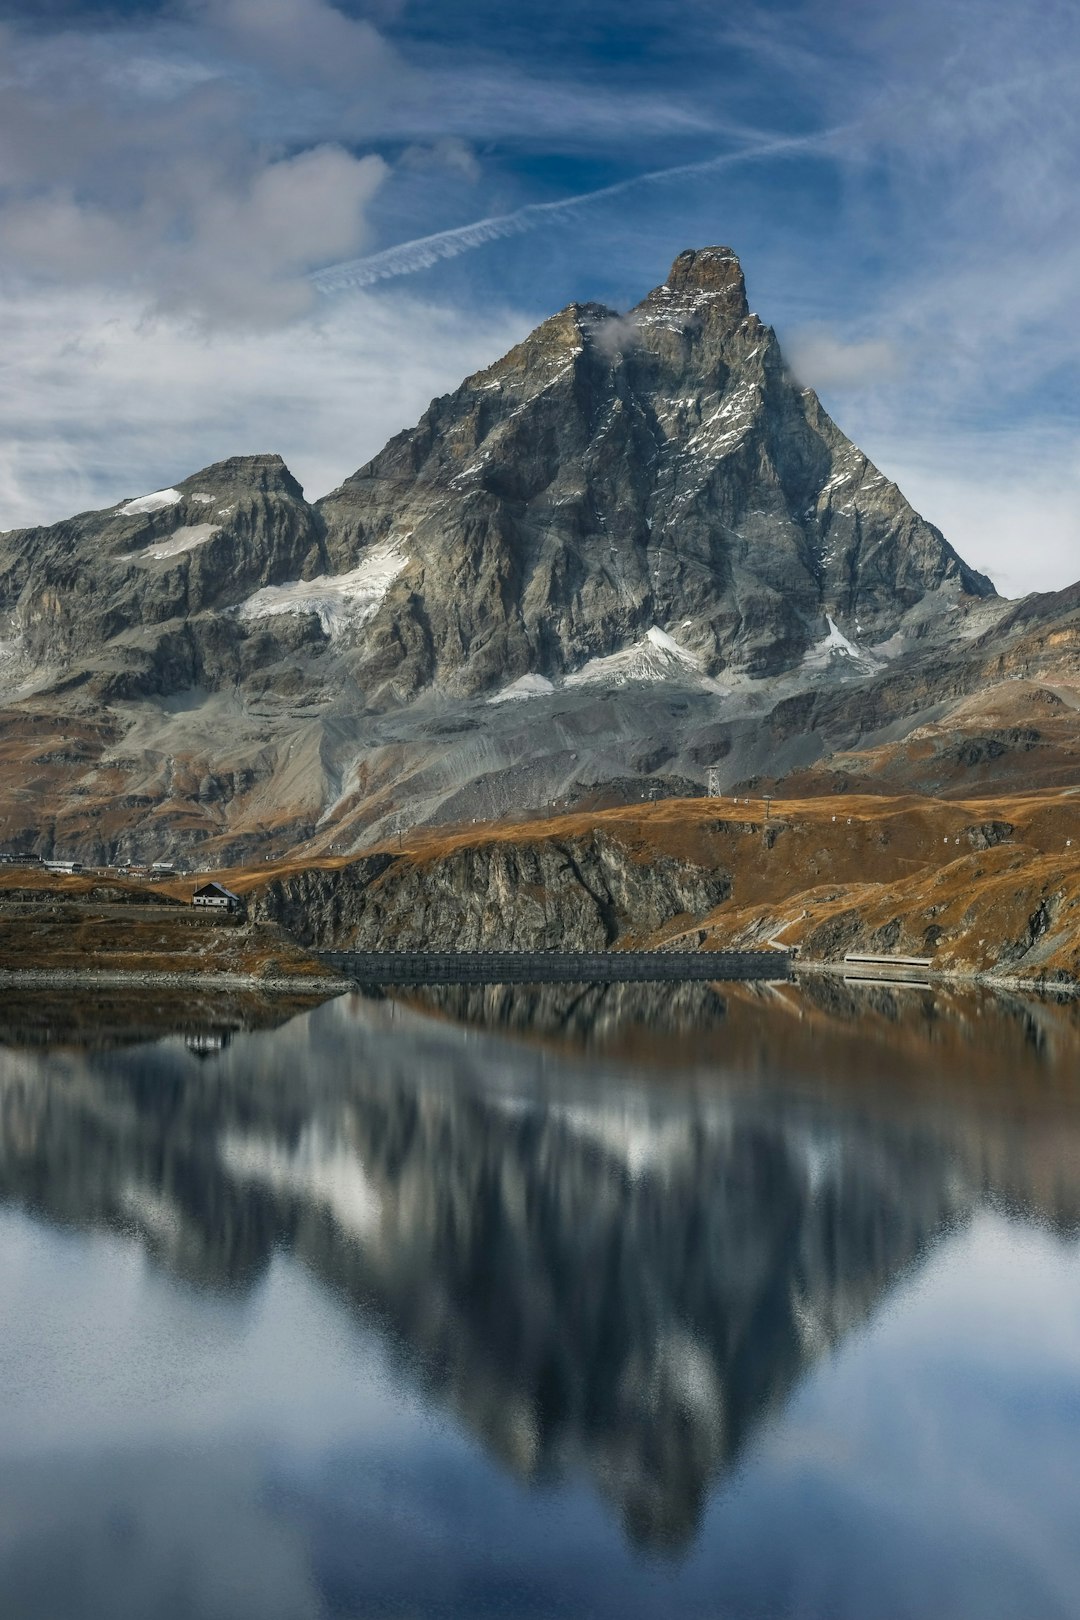 Travel Tips and Stories of Klein Matterhorn in Italy